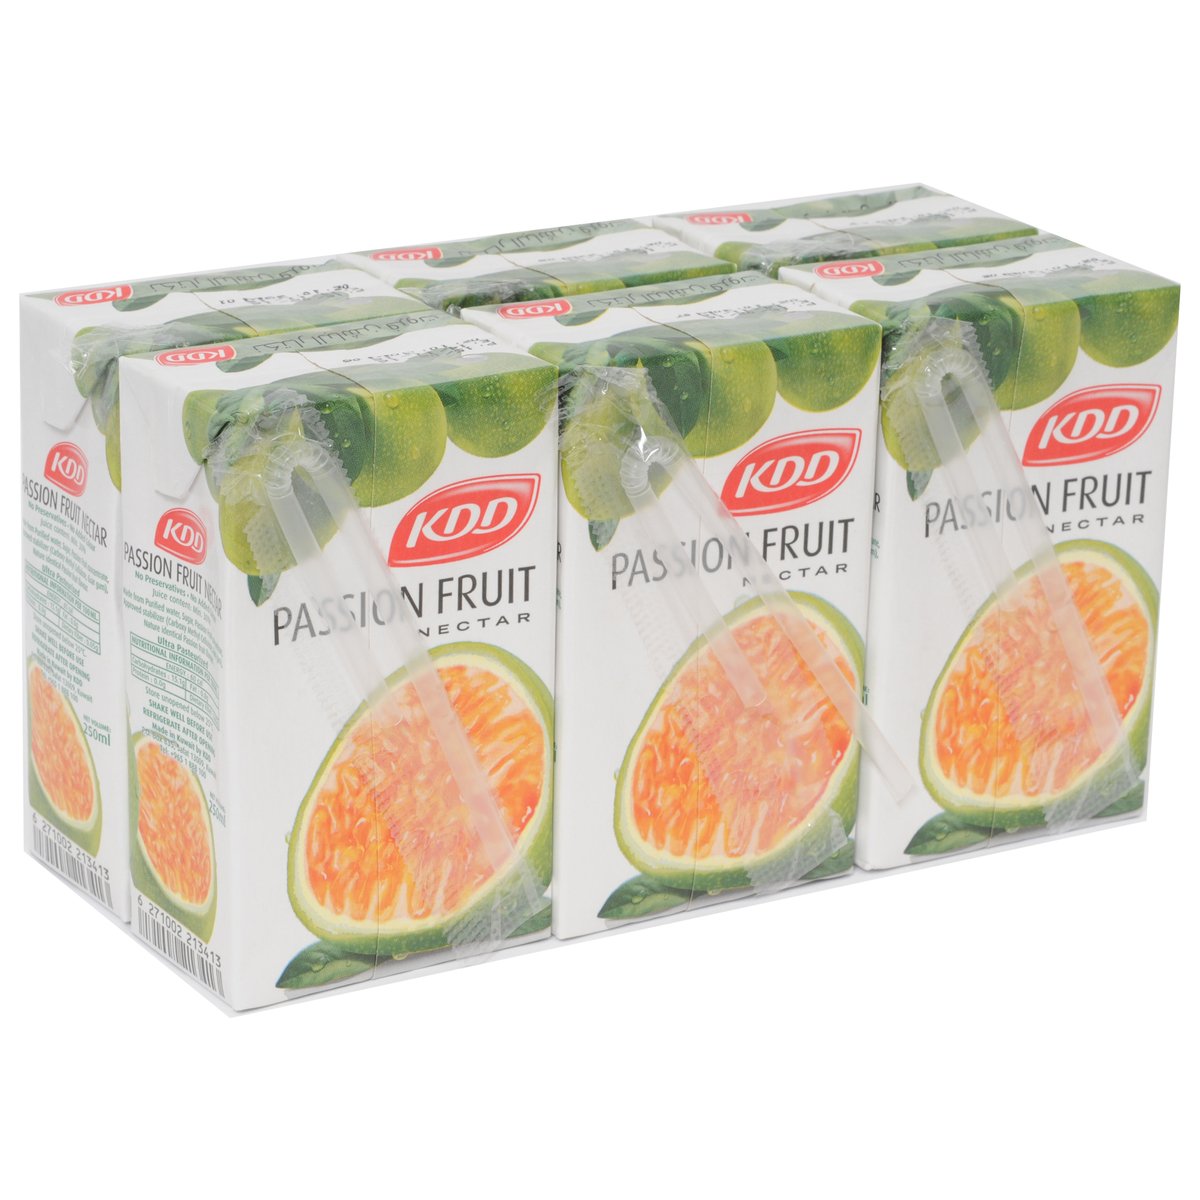 KDD Passion Fruit Nectar 250ml x 6 Pieces